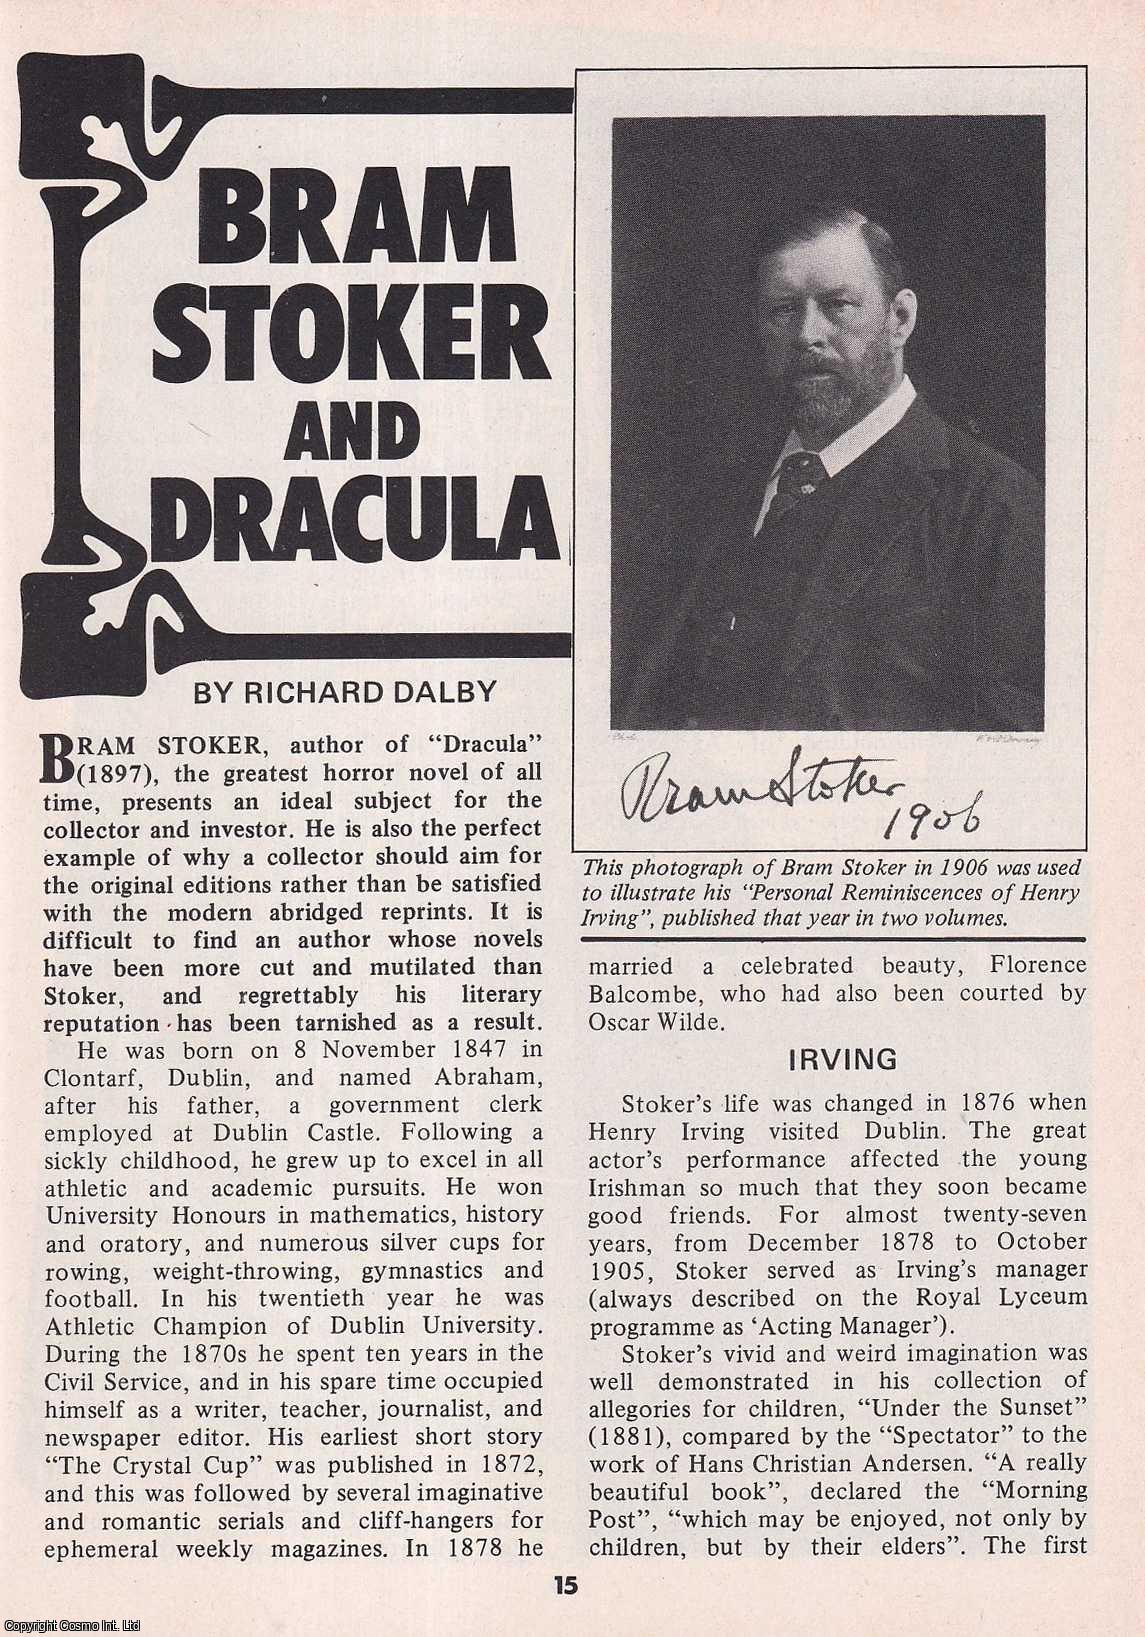 Richard Dalby - Bram Stoker & Dracula. This is an original article separated from an issue of The Book & Magazine Collector publication.